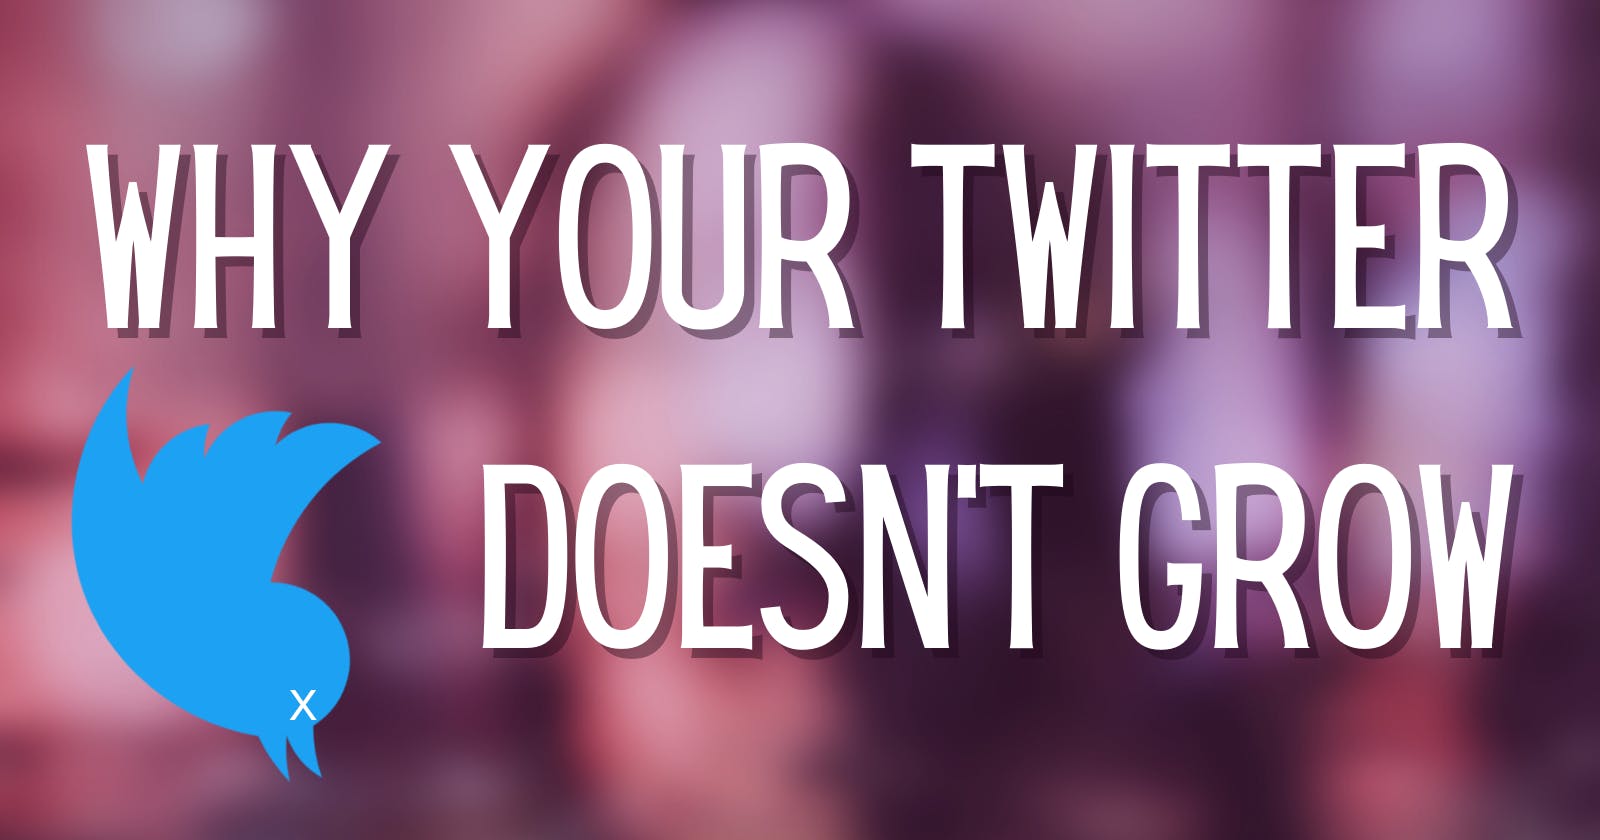 This is why your Twitter isn't growing - Twitter explained